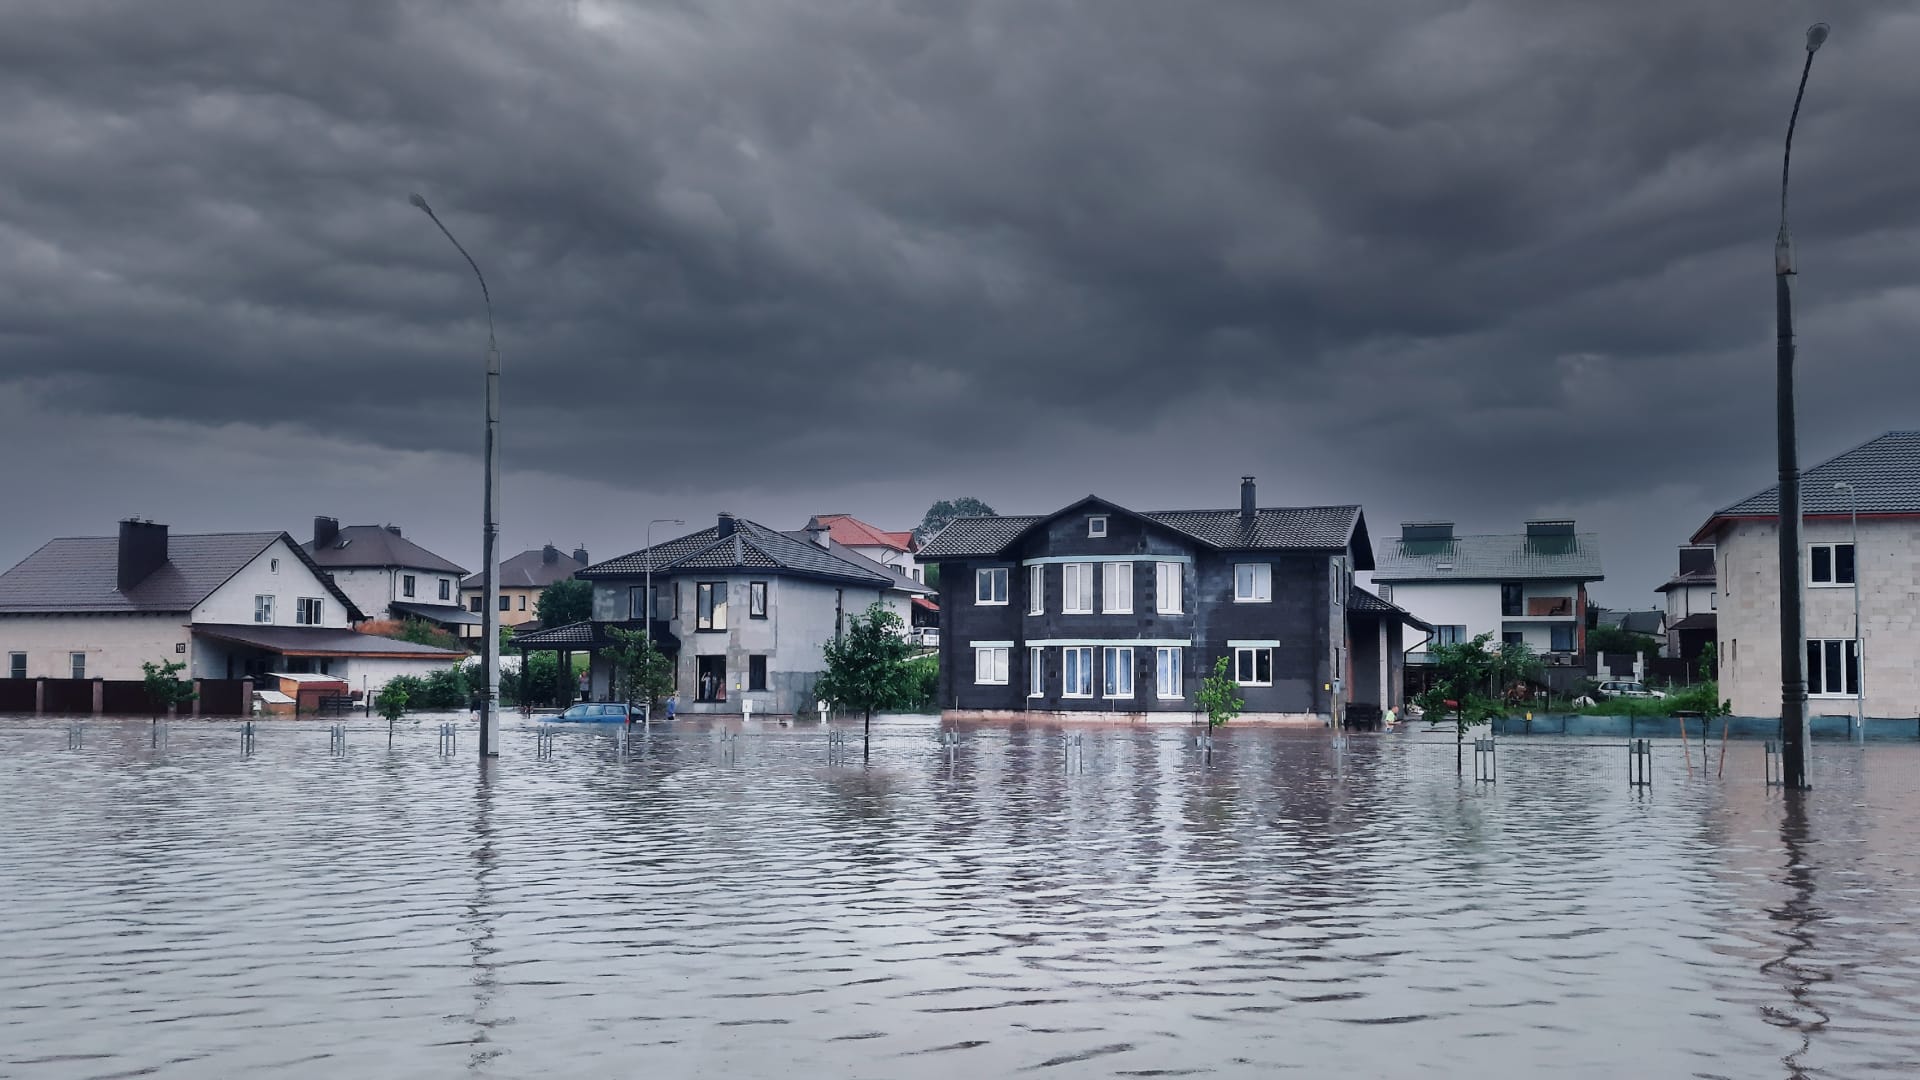 Dave Burt, a 'Big Short' investor, fears flood risk is fueling a housing price bubble